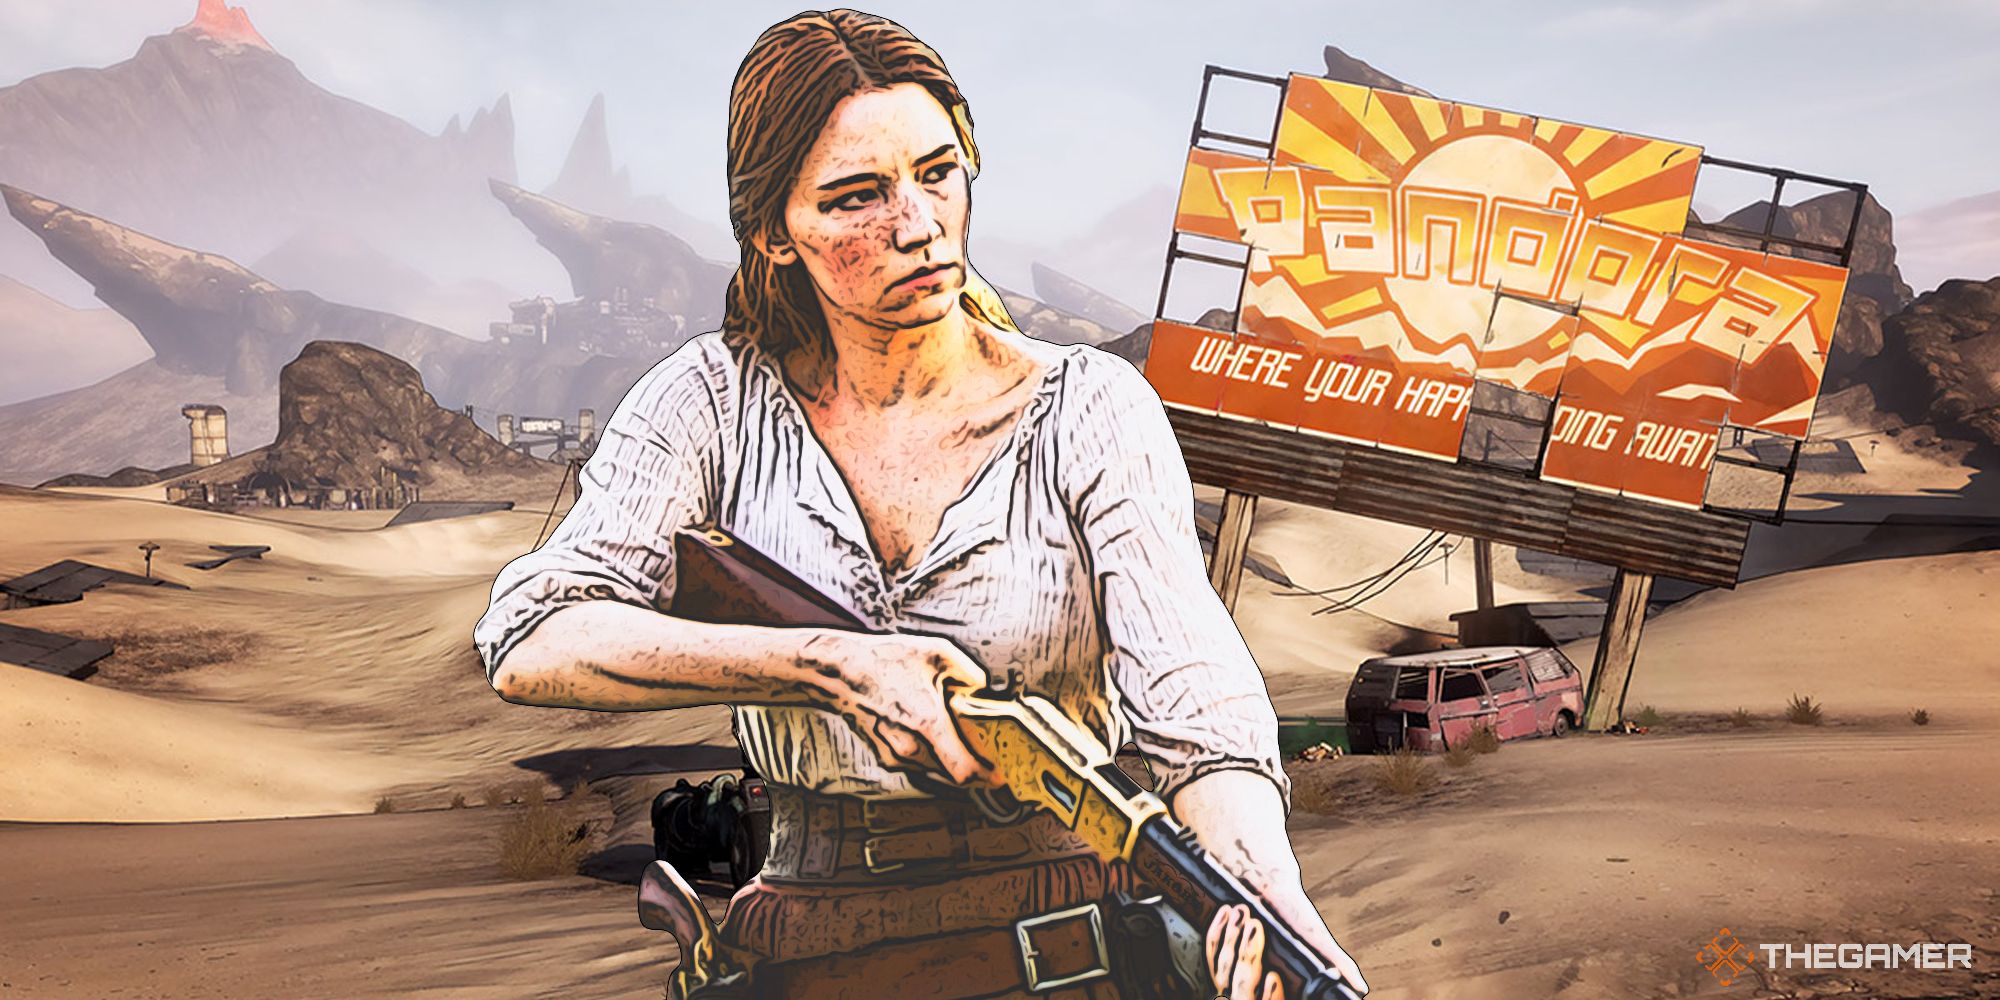 Haley Bennett in the Magnificent Seven in Borderlands art style